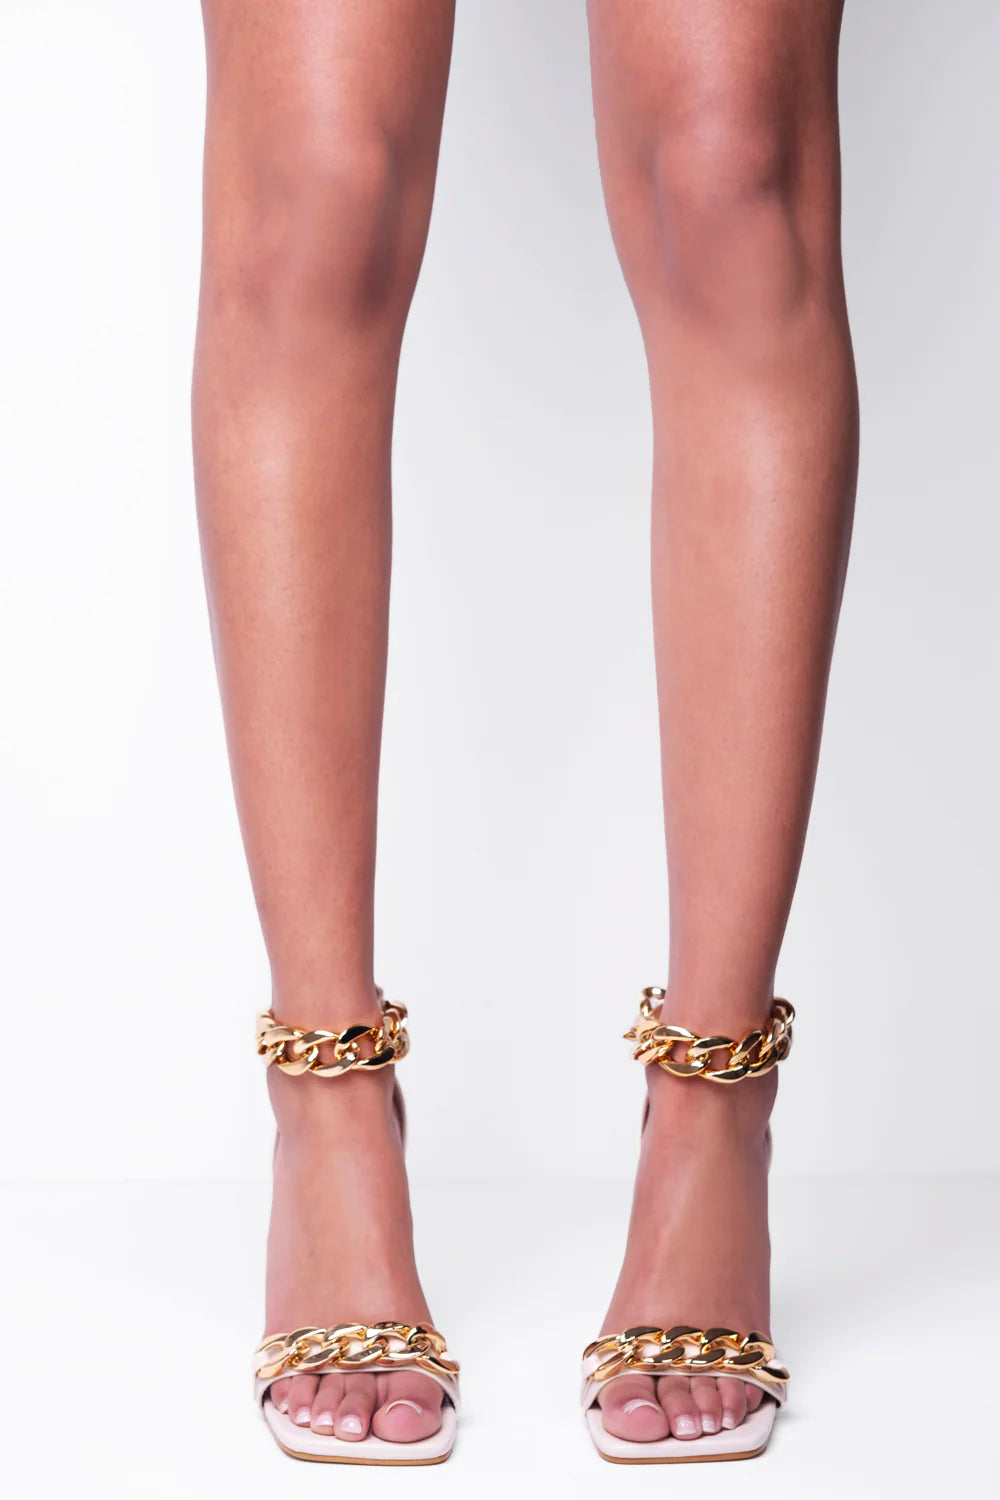 Steve Madden Decadent heeled shoes with chain ankle strap in black and gold  | ASOS